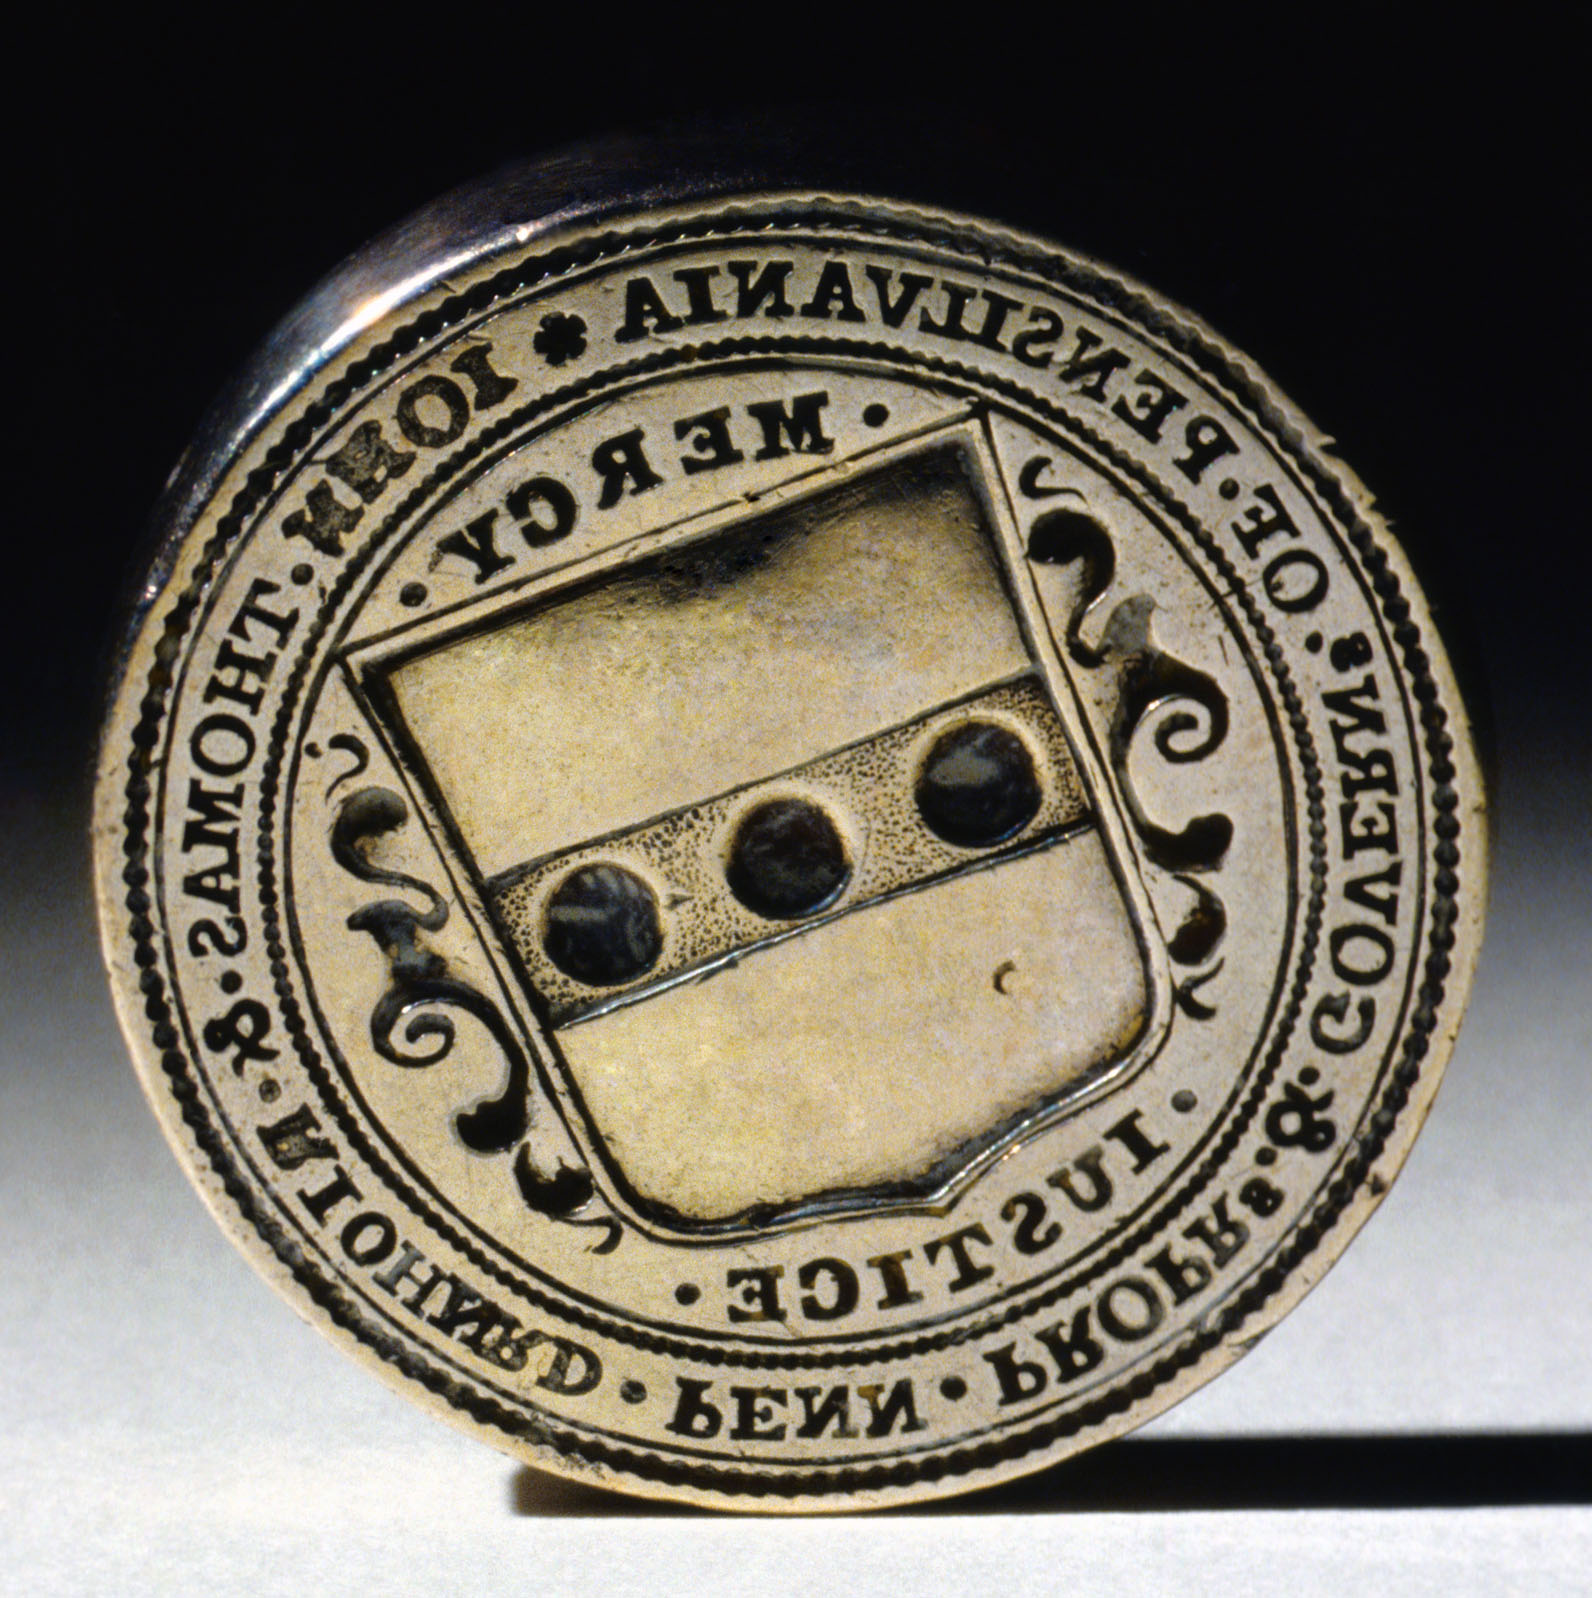 1955.0557 Seal, view 2